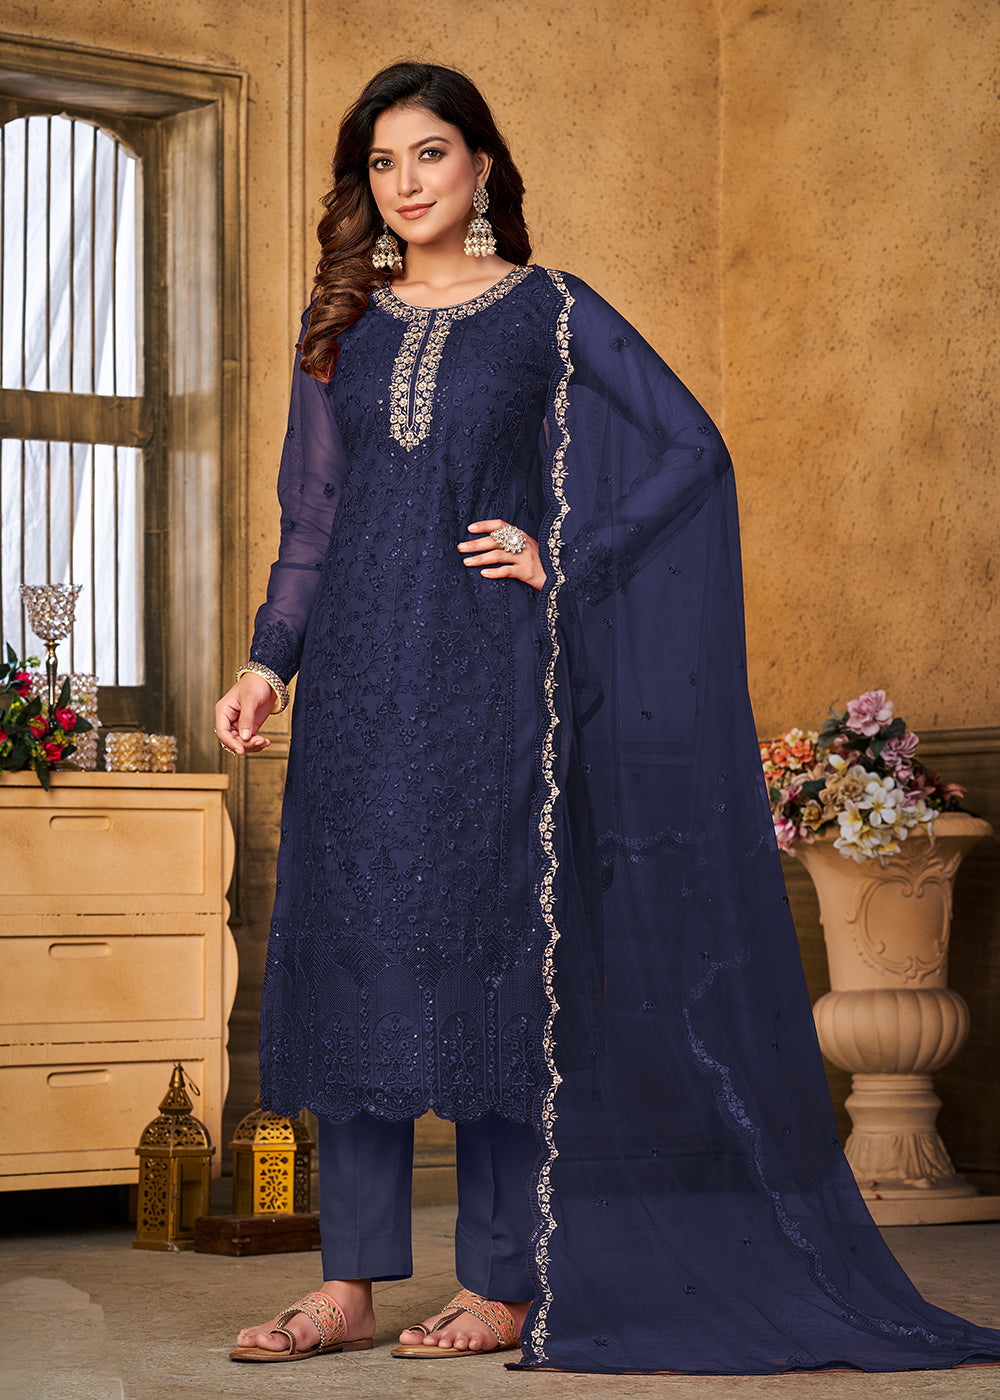 Buy Now Festive Party Blue Net Embroidered Trendy Salwar Suit Online in USA, UK, Canada, Germany, Australia & Worldwide at Empress Clothing.